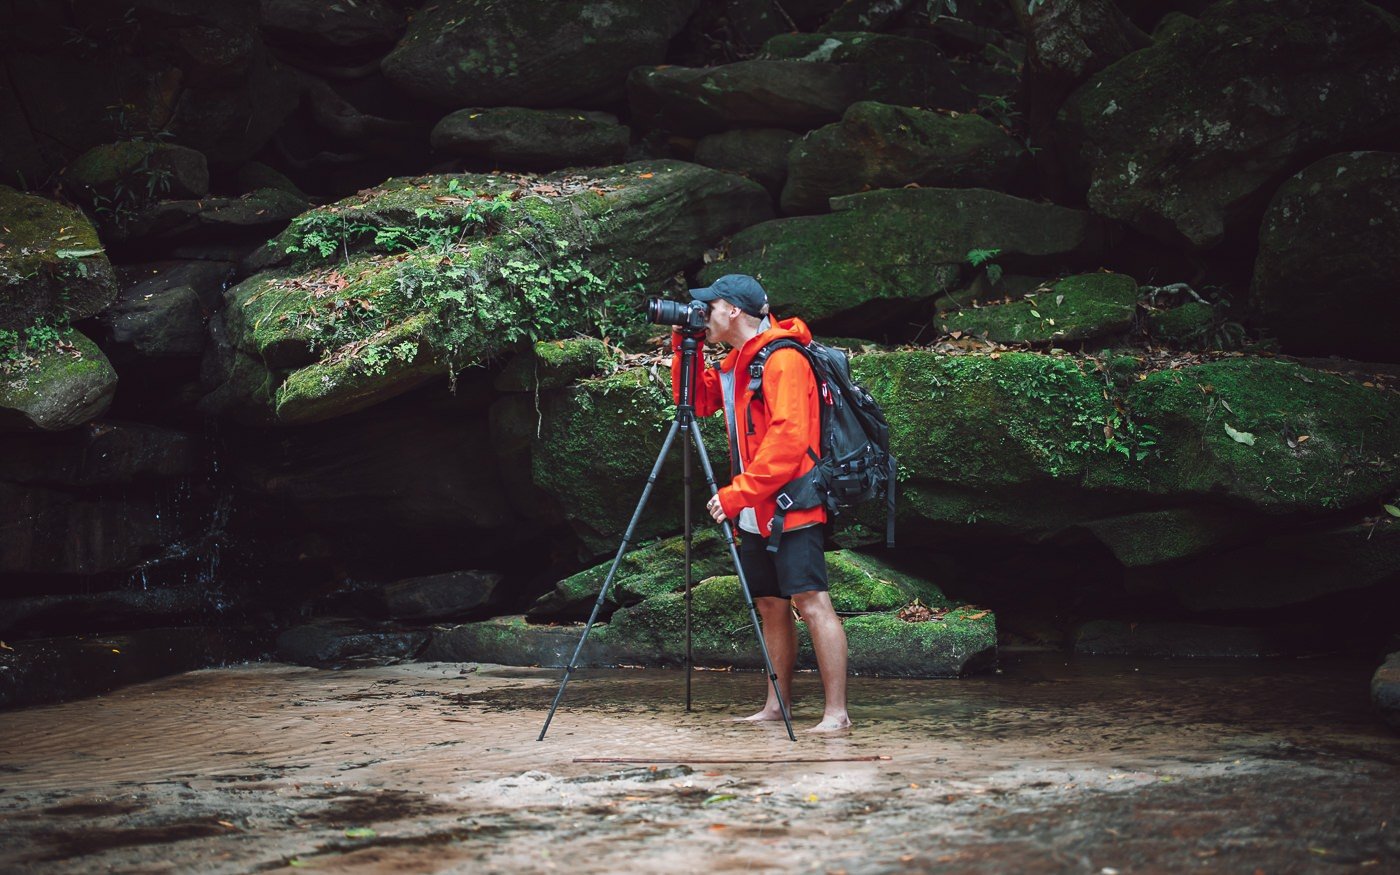 HEIPI Tripod Review – Is this the Best Budget Tripod for Mirrorless Cameras?